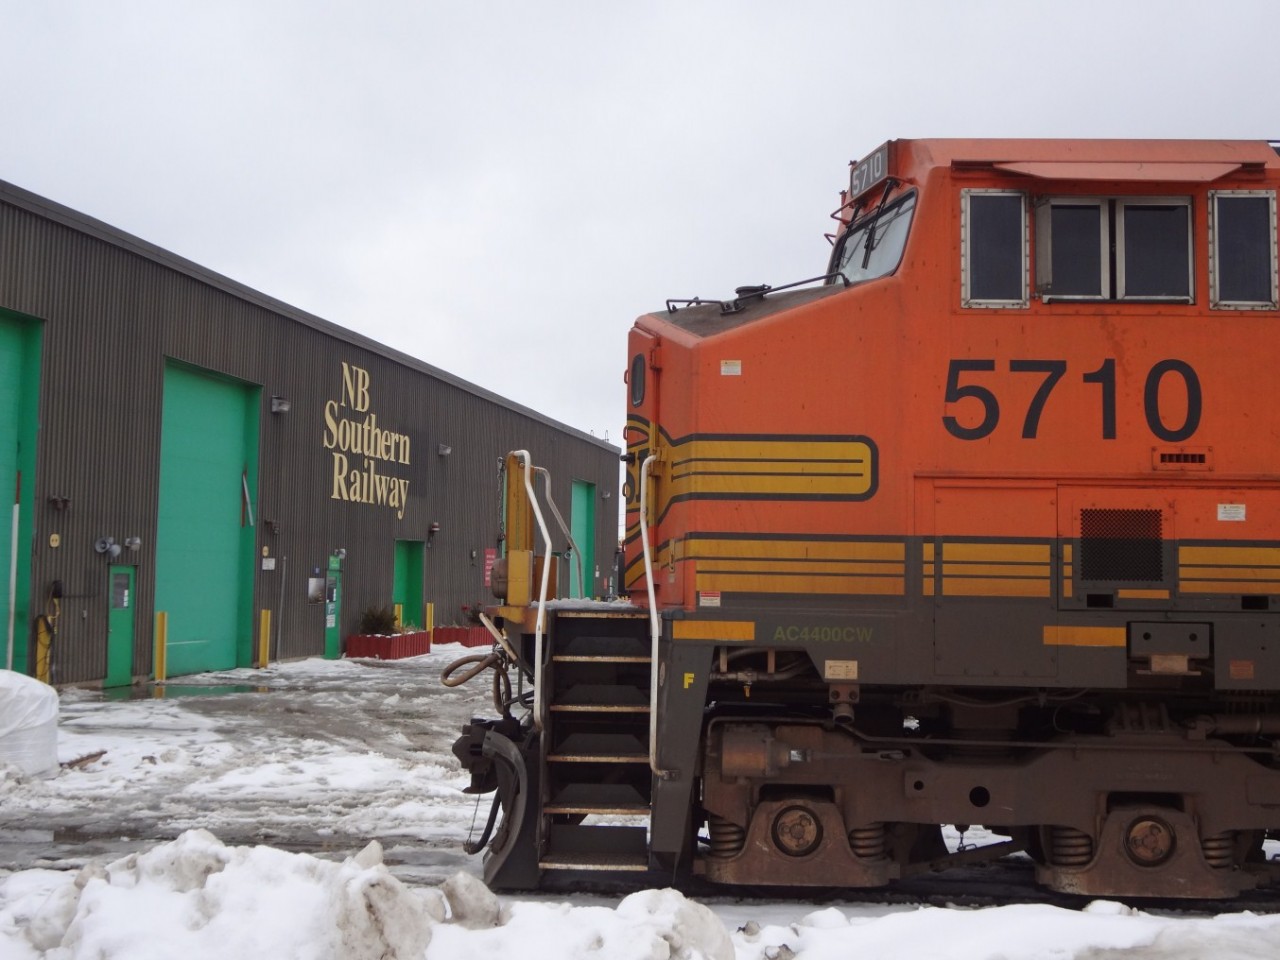 AC4400CW BNSF 5710 is a long way from home rails as it sits outside the main shop of New Brunswick Southern Railway in Saint John, NB. on this dismal February day. (D. Wylie photo submitted with permission).